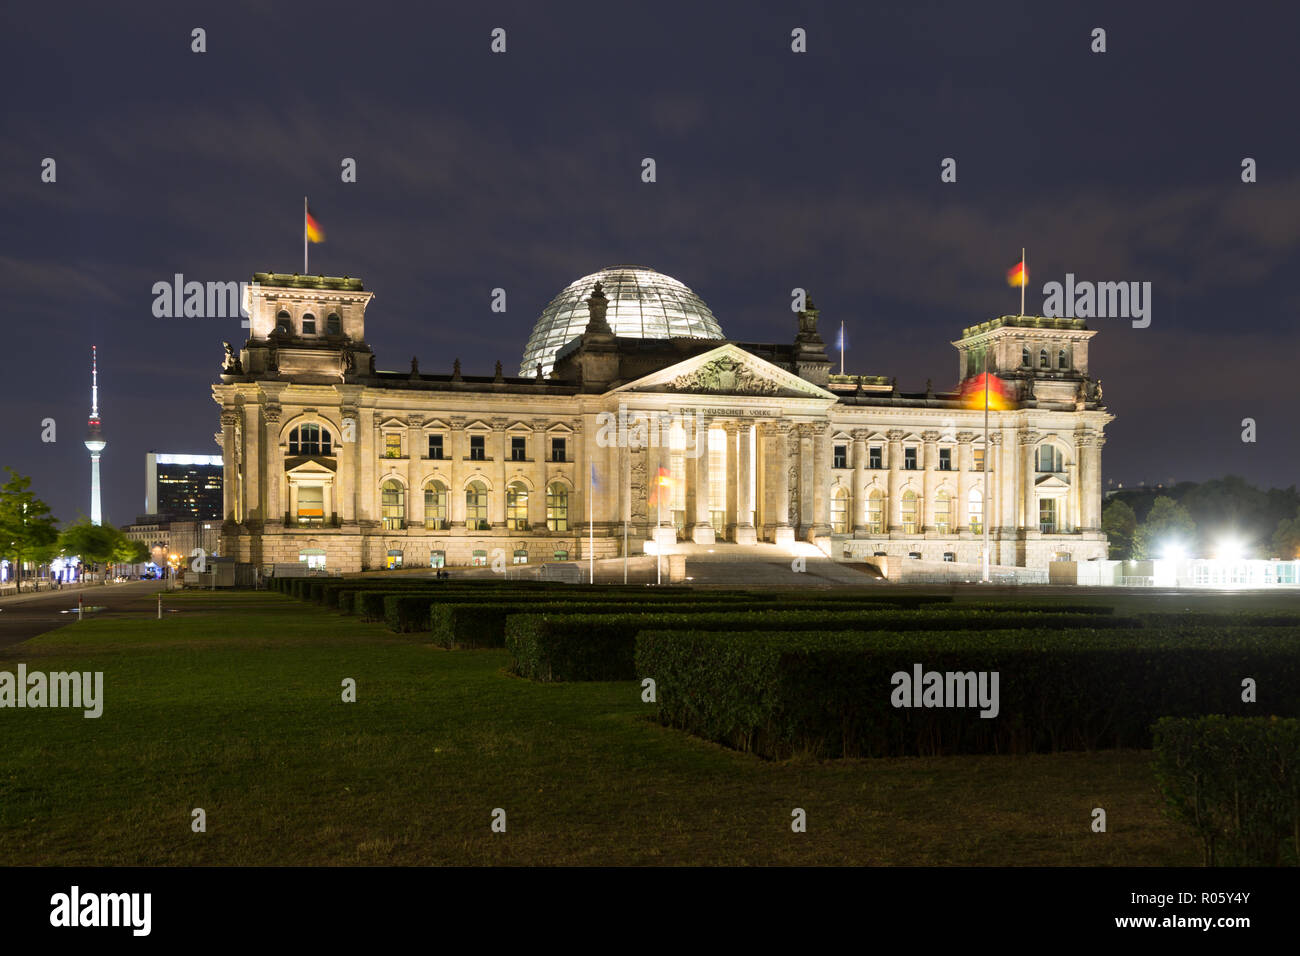 Reichstag at night, behind television tower Alexanderplatz, government quarter, Berlin, Germany Stock Photo